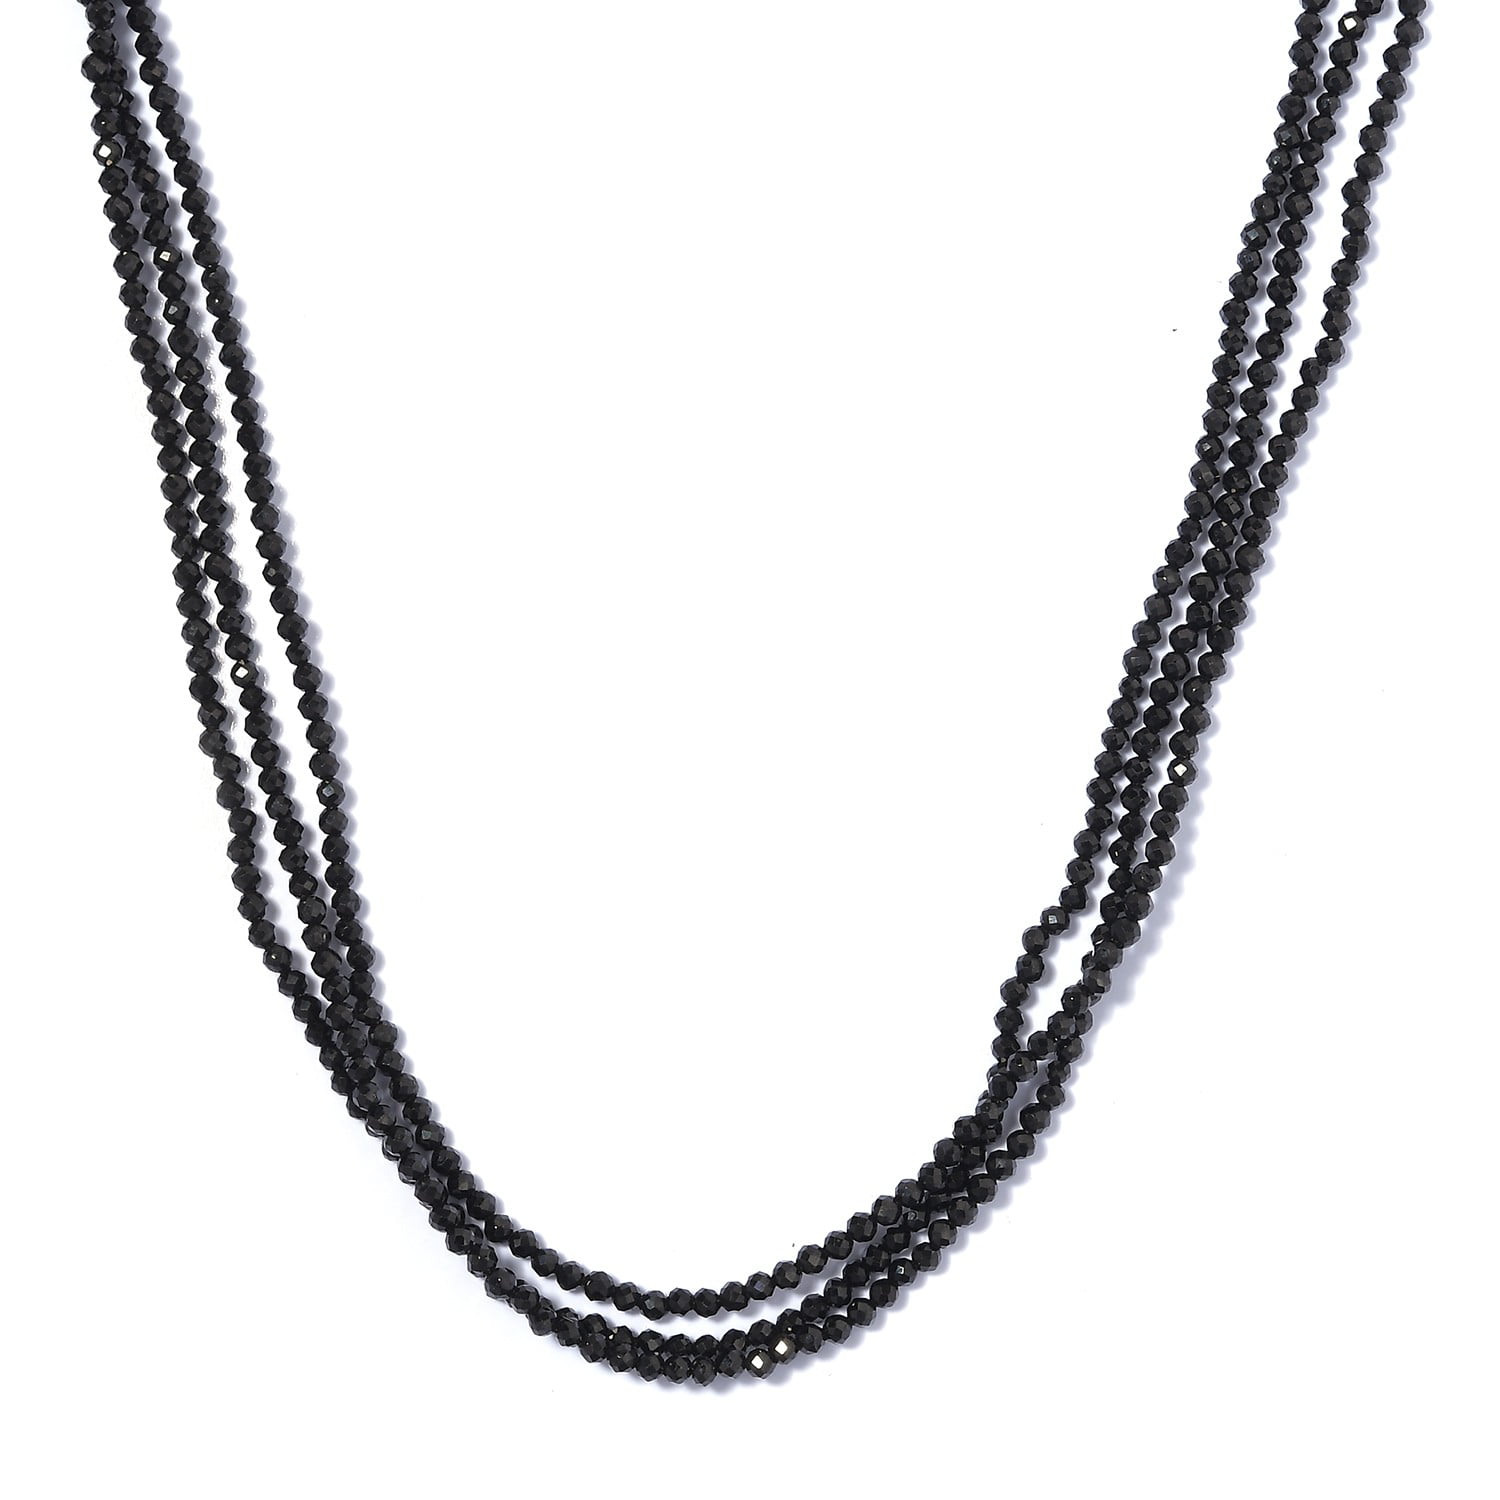 dainty black necklace,short necklace,14 inches necklace,seed bead necklace,layering black beaded necklace Black and silver choker necklace